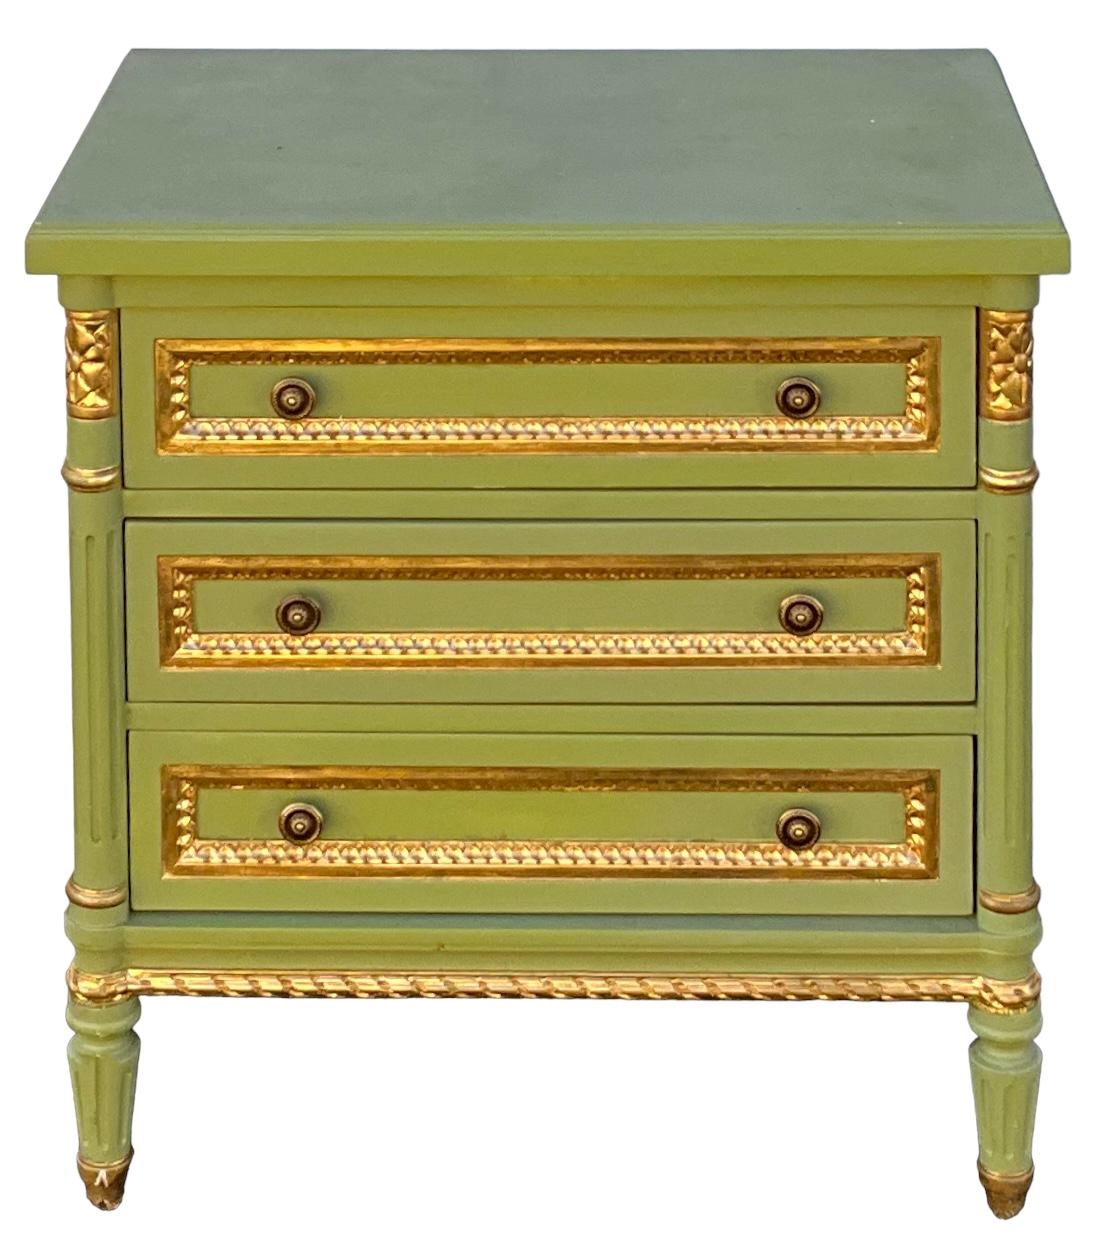 This is a pair of French Louis XVI style chests or side tables attributed to Julia Gray. They are green with gilt accents and have three drawers. They are in very good condition.